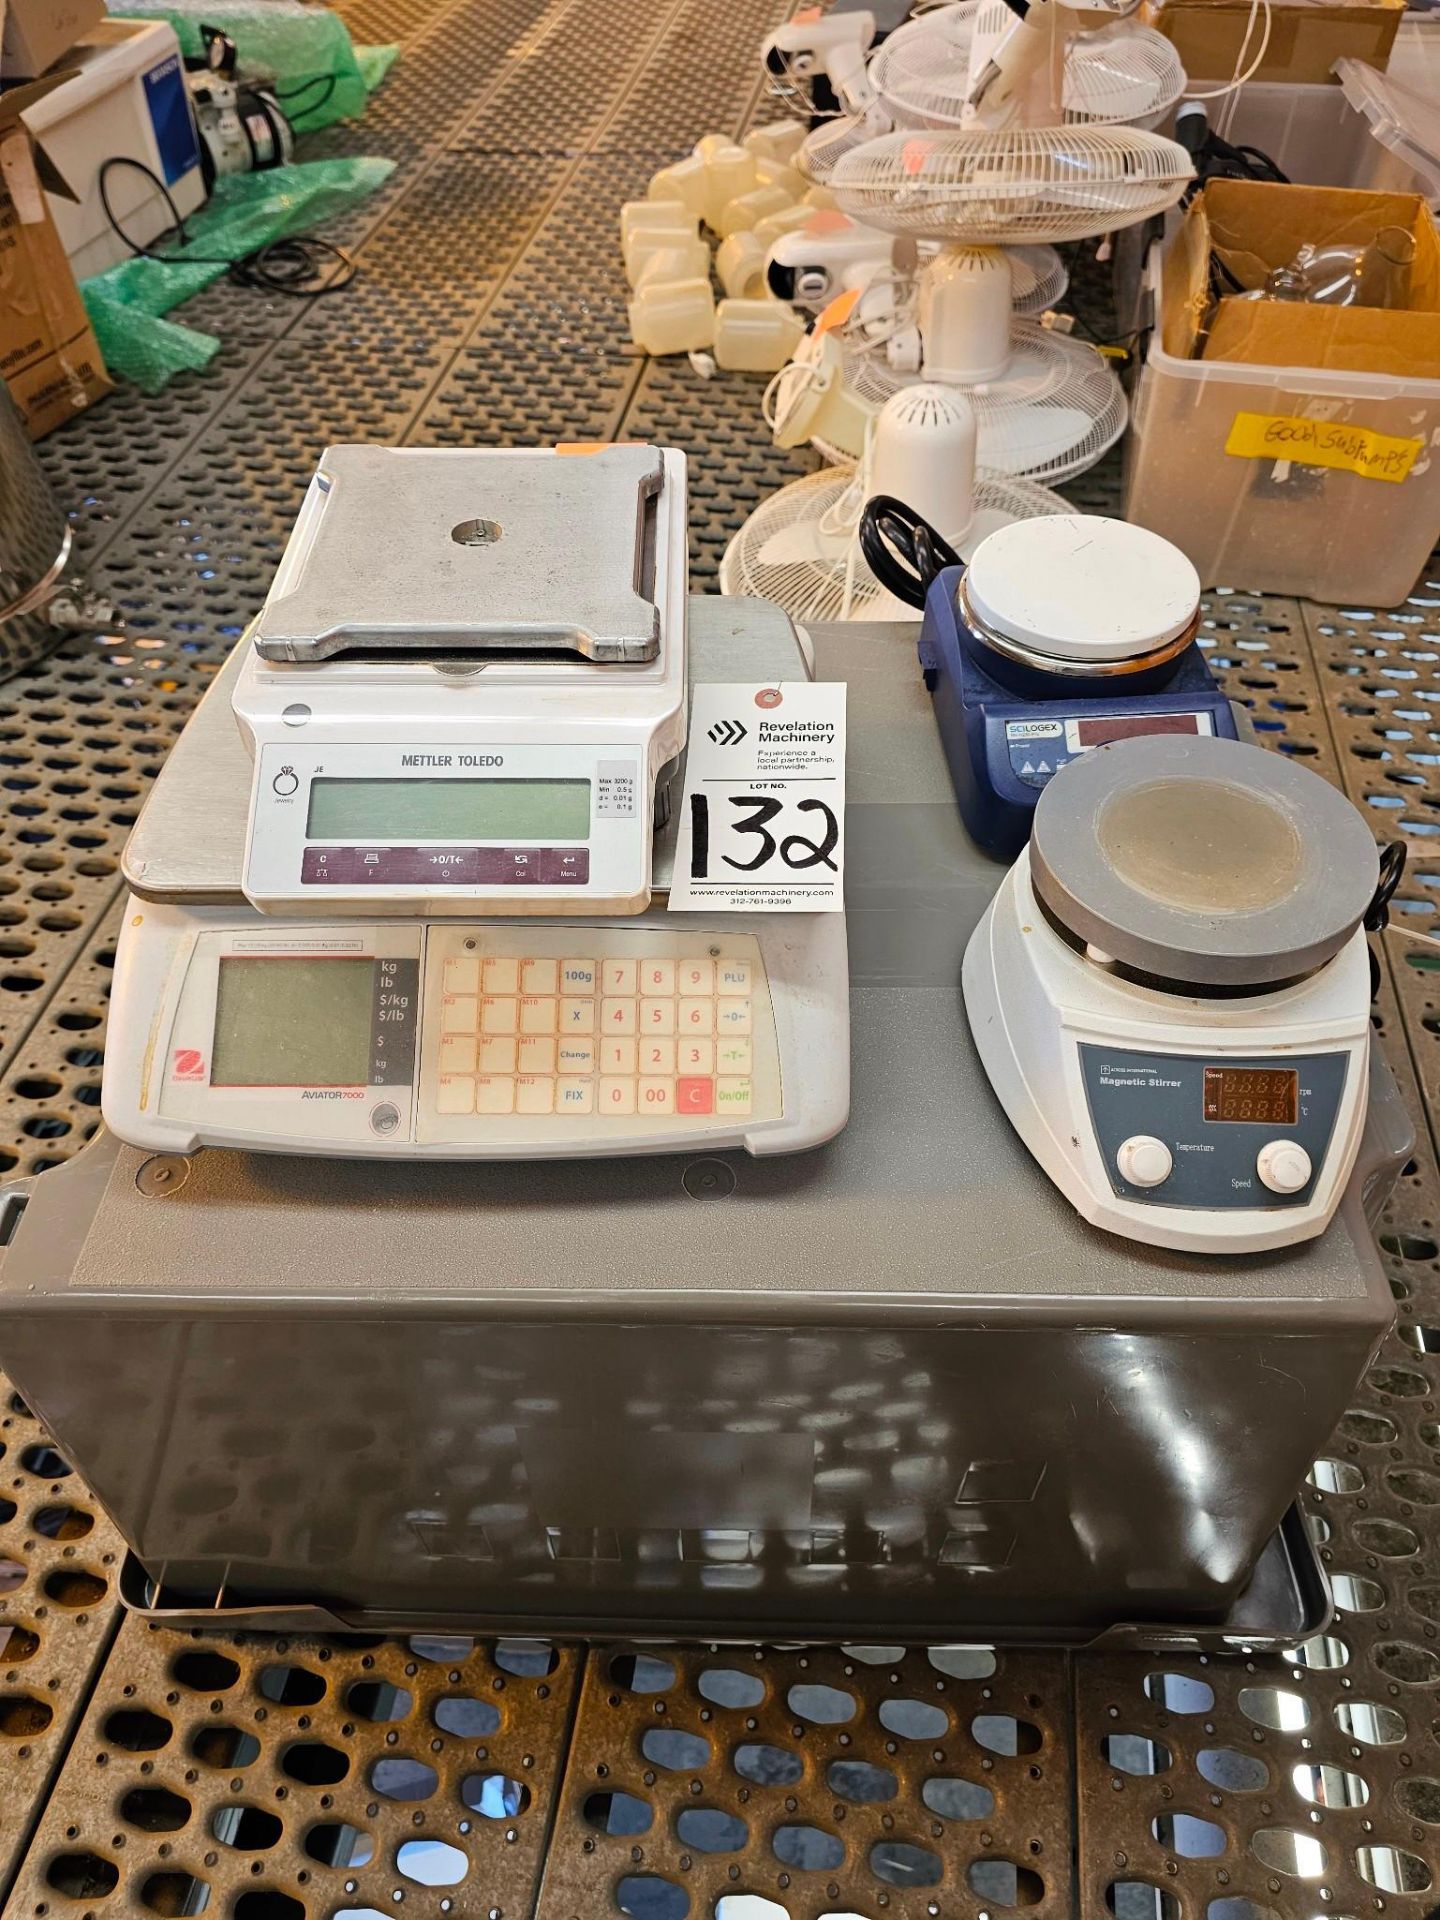 ASSORTED DIGITAL SCALES, MAGNETIC STIRRERS, INDUCTION SEALING MACHINE, FILTER PAPER